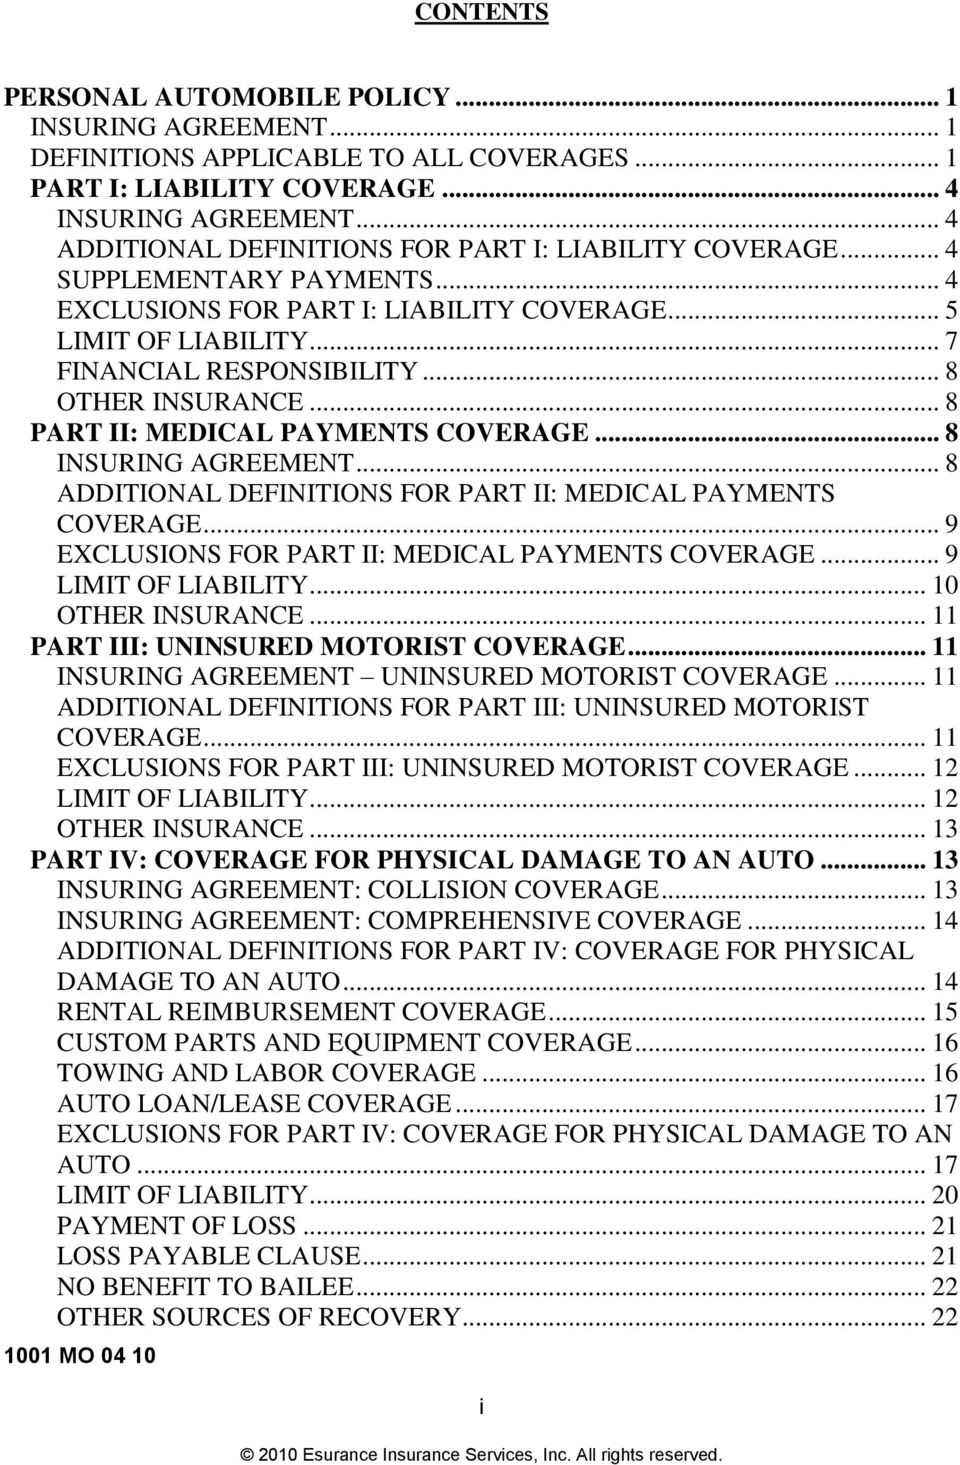 .. 8 OTHER INSURANCE... 8 PART II: MEDICAL PAYMENTS COVERAGE... 8 INSURING AGREEMENT... 8 ADDITIONAL DEFINITIONS FOR PART II: MEDICAL PAYMENTS COVERAGE.